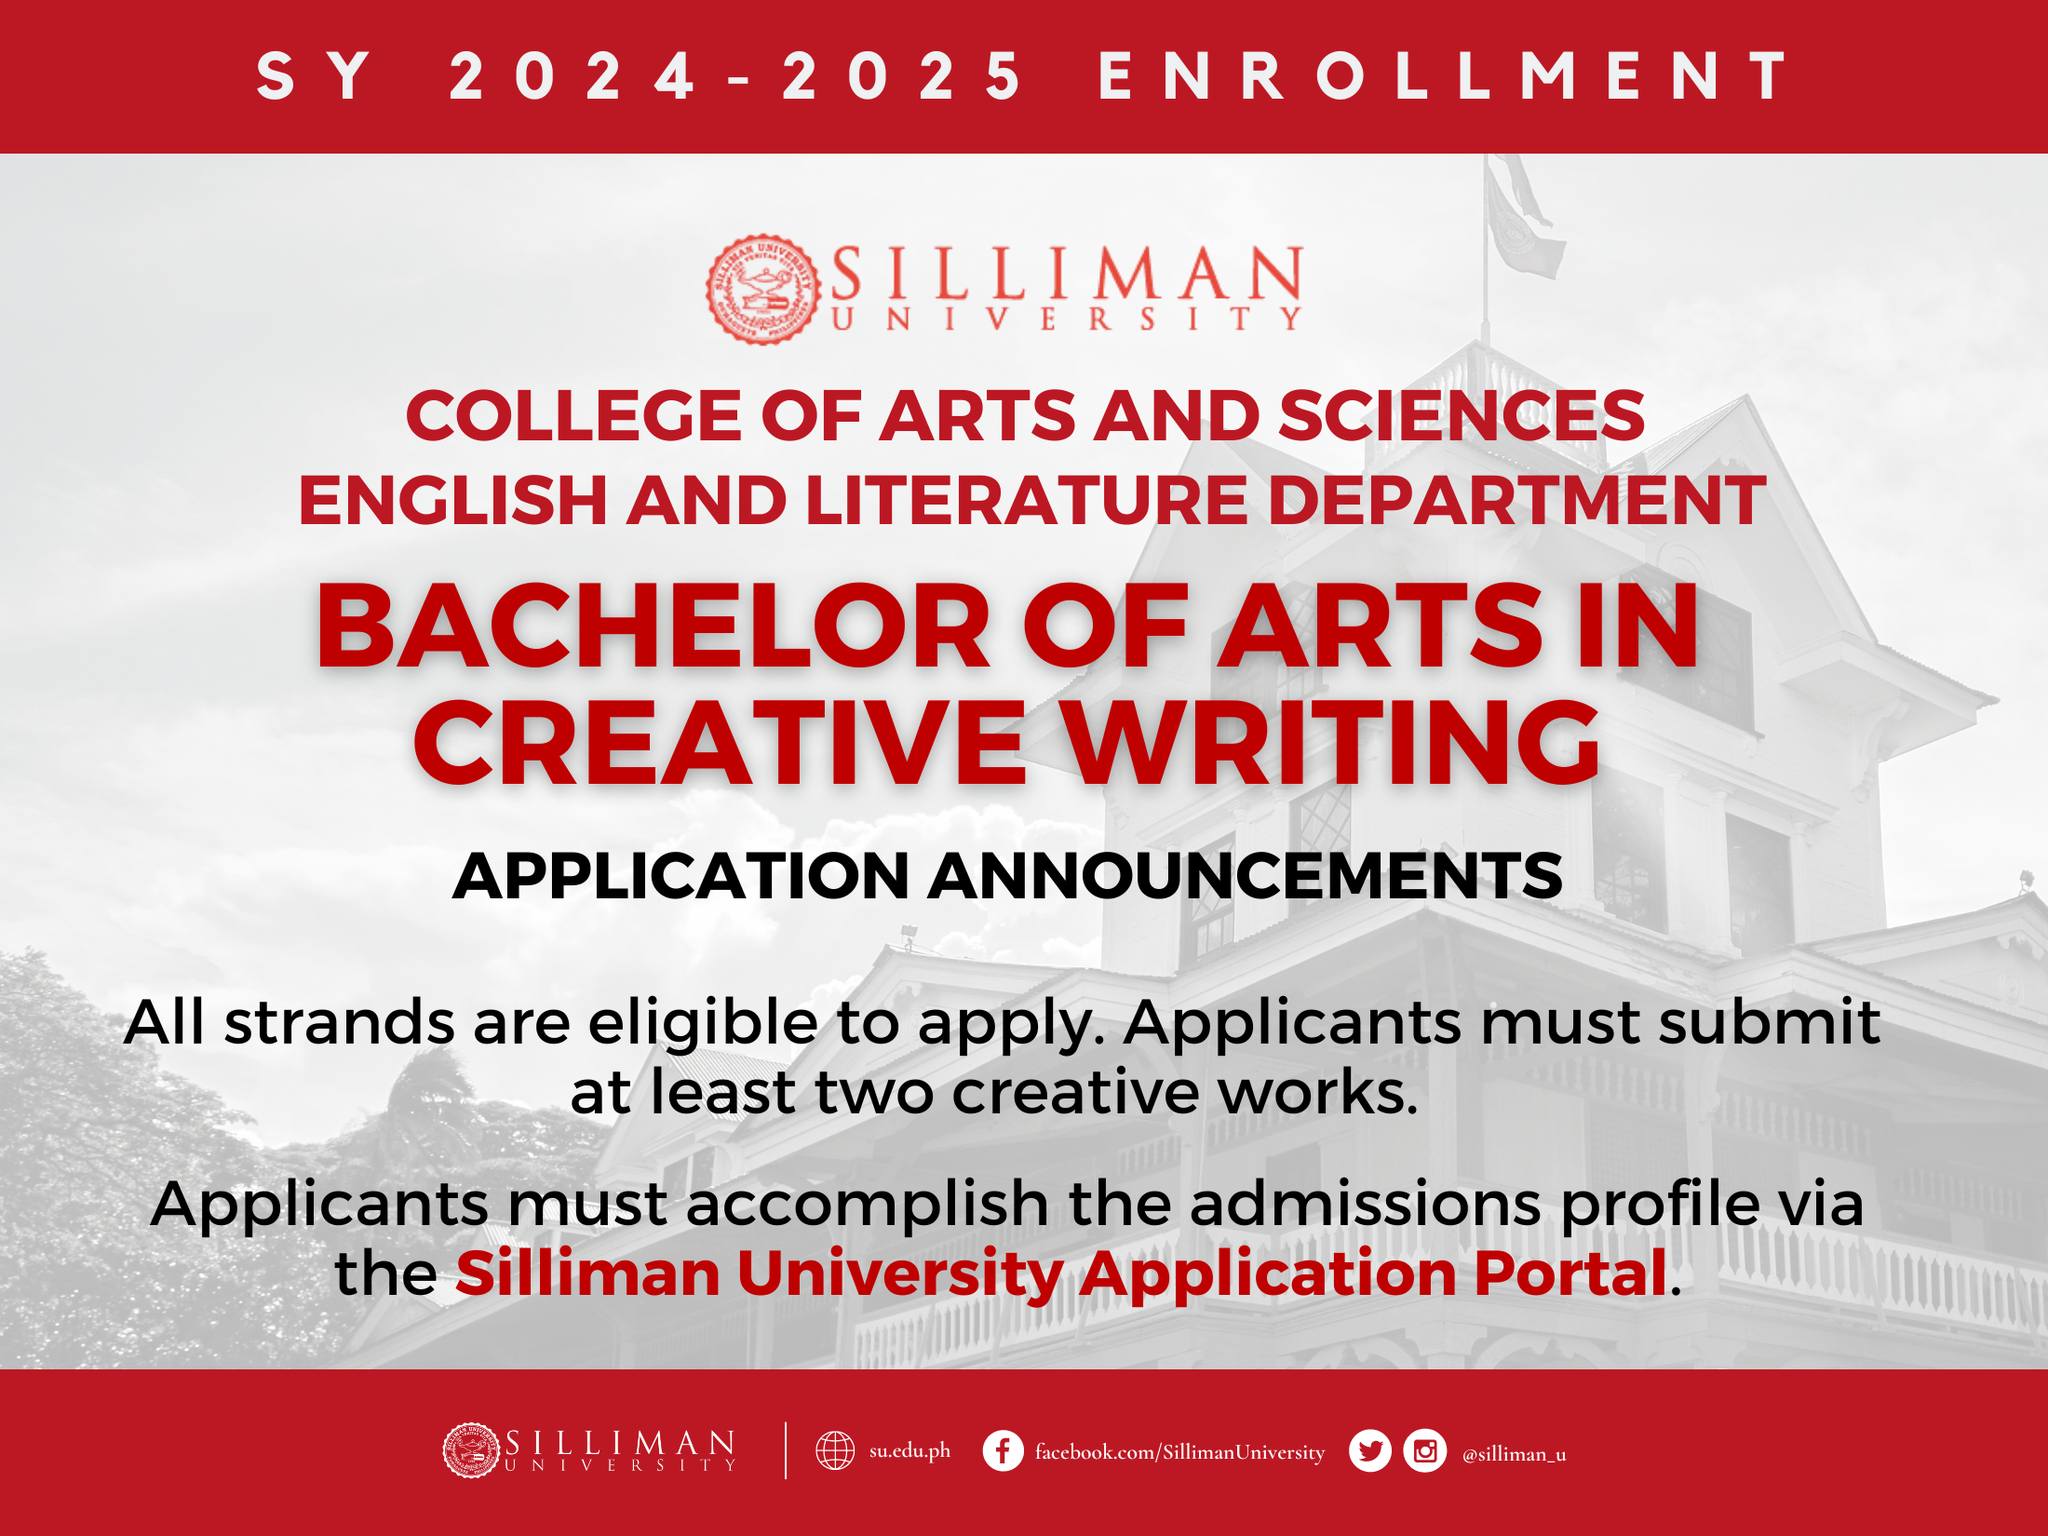 College of Arts and Sciences – English and Literature Department is now accepting applications for the following degrees for SY 2024-2025